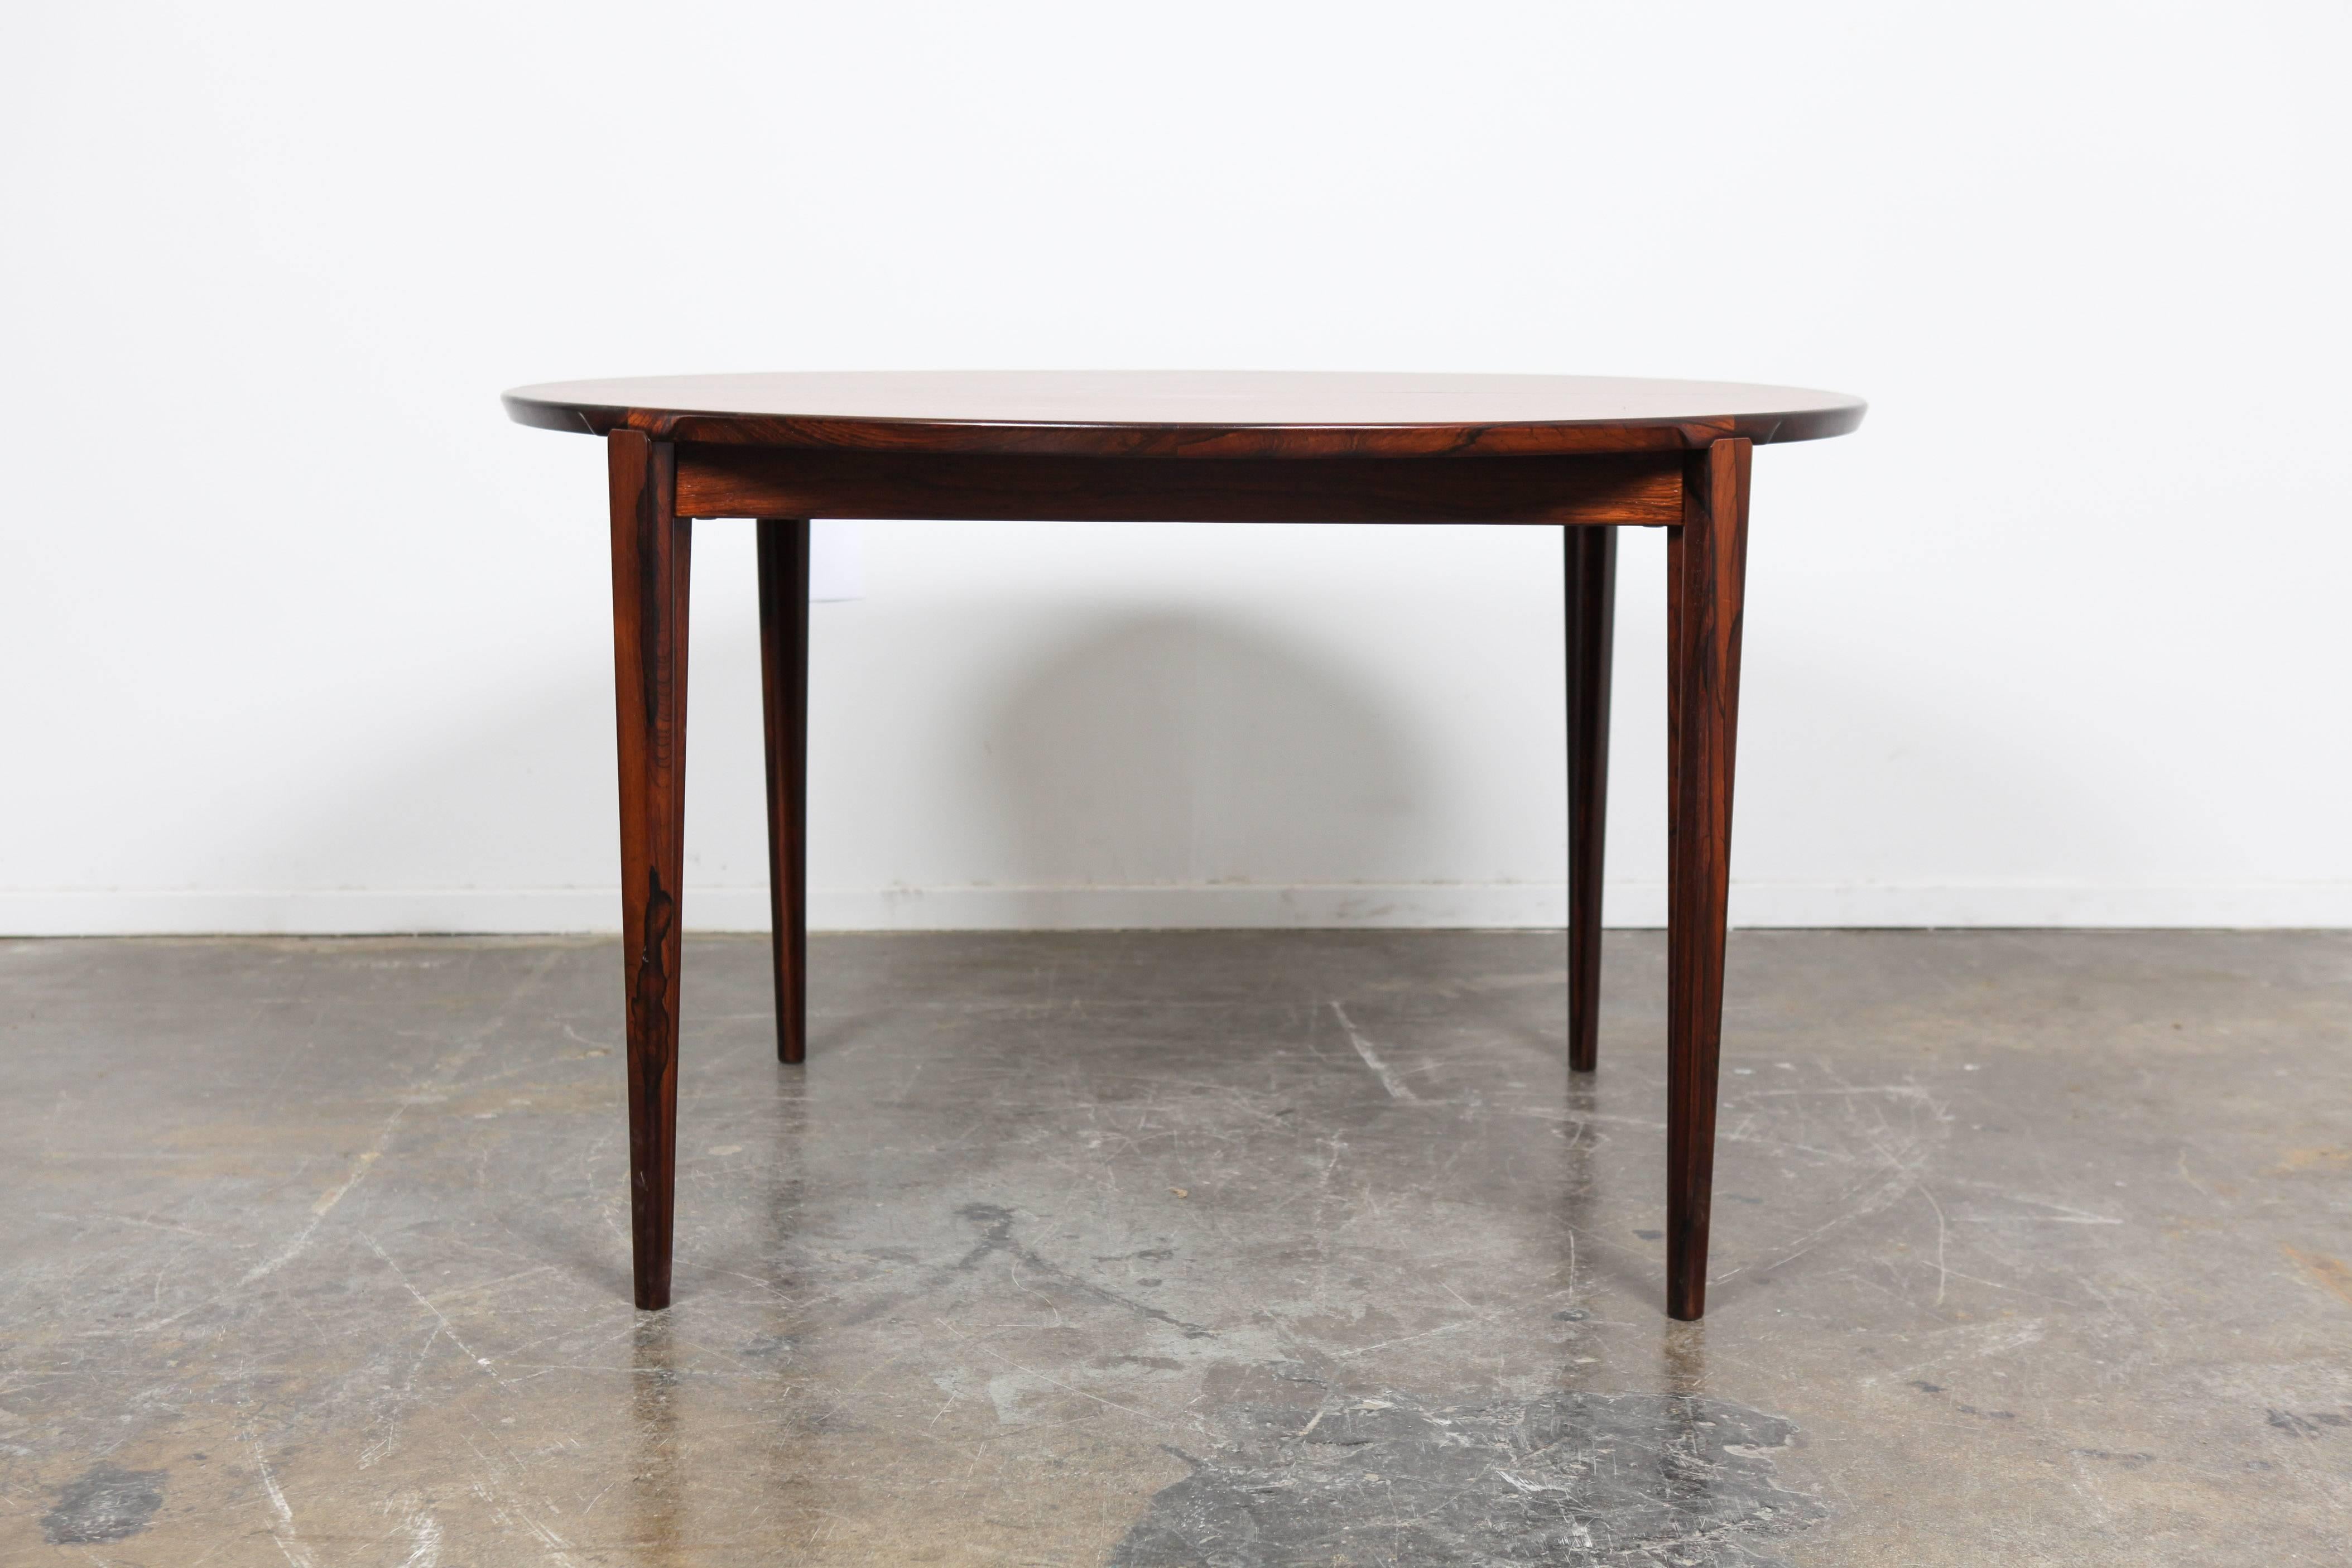 Round Danish rosewood dining table with excellent grain and elegant details, designed by Rosengren Hansen, 1960s.